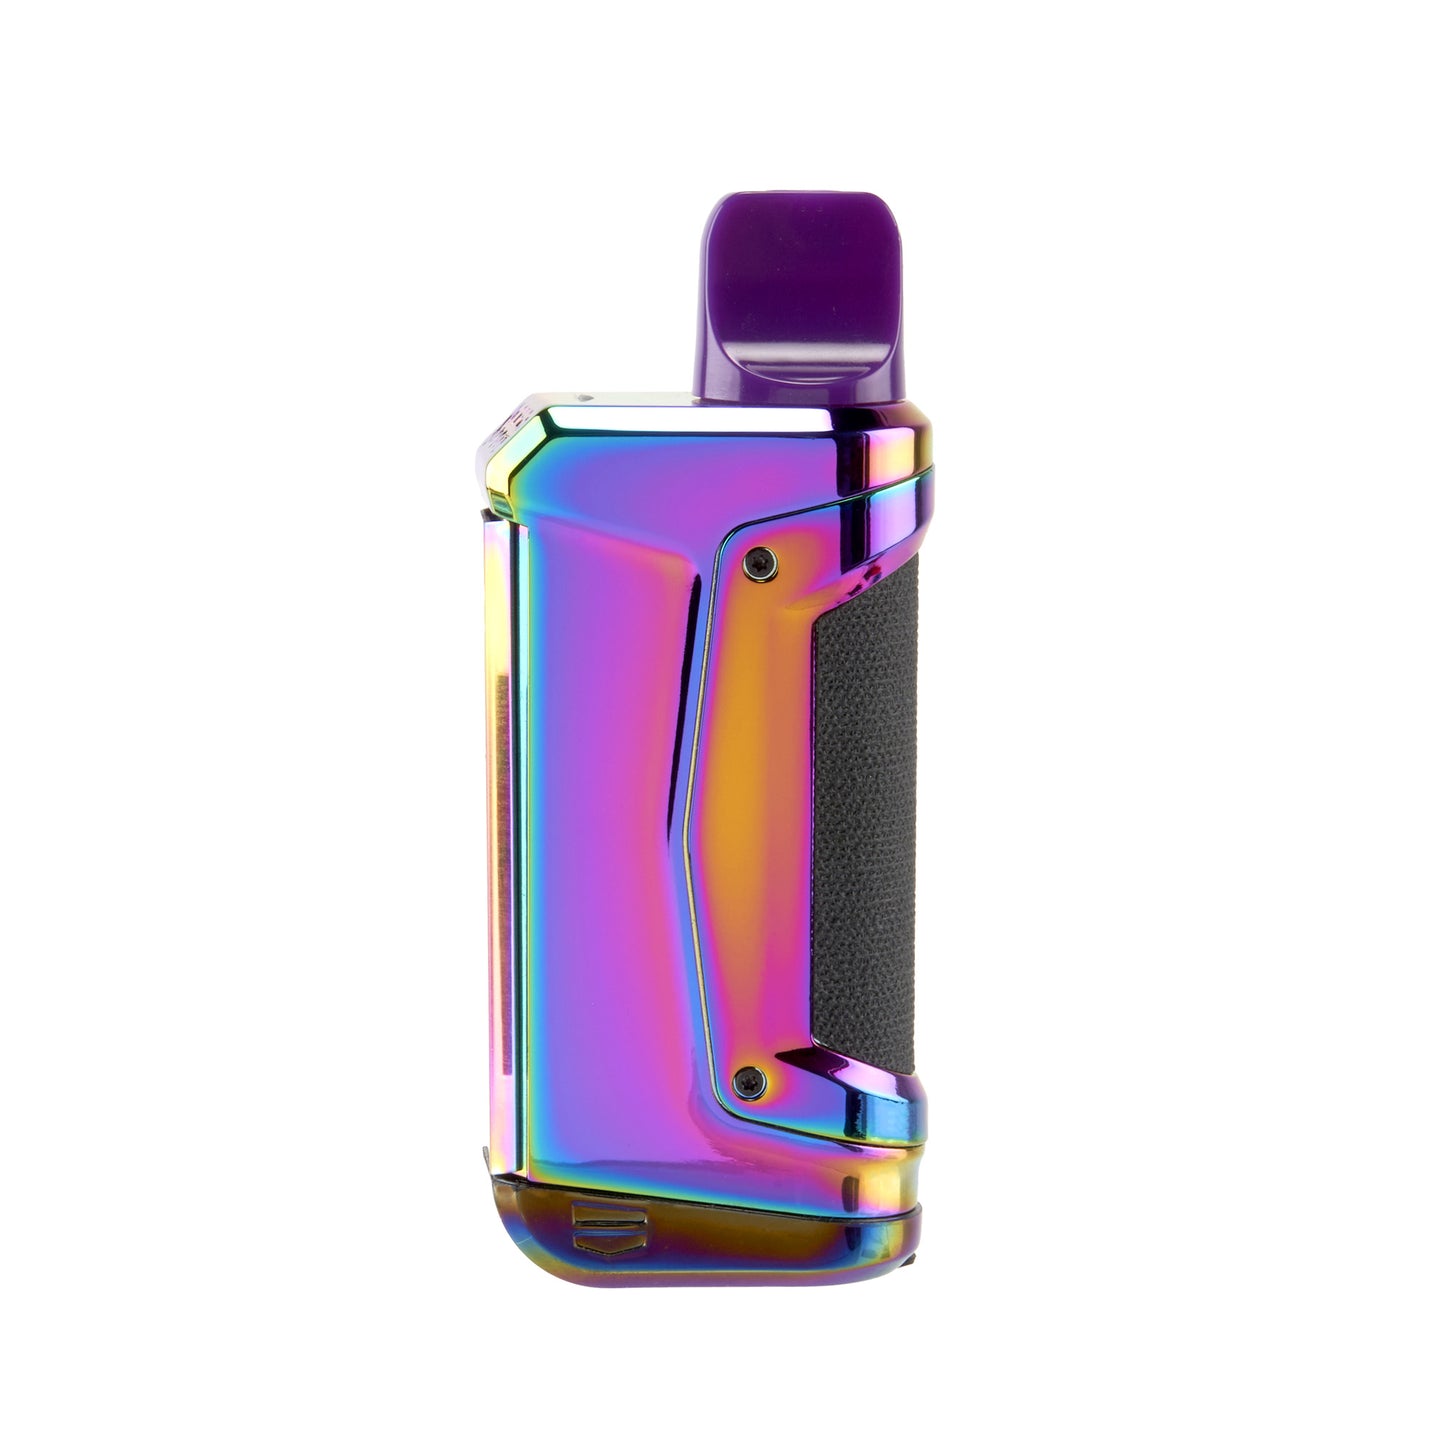 The rainbow Ooze Duplex 2 extract vape is fully assembled